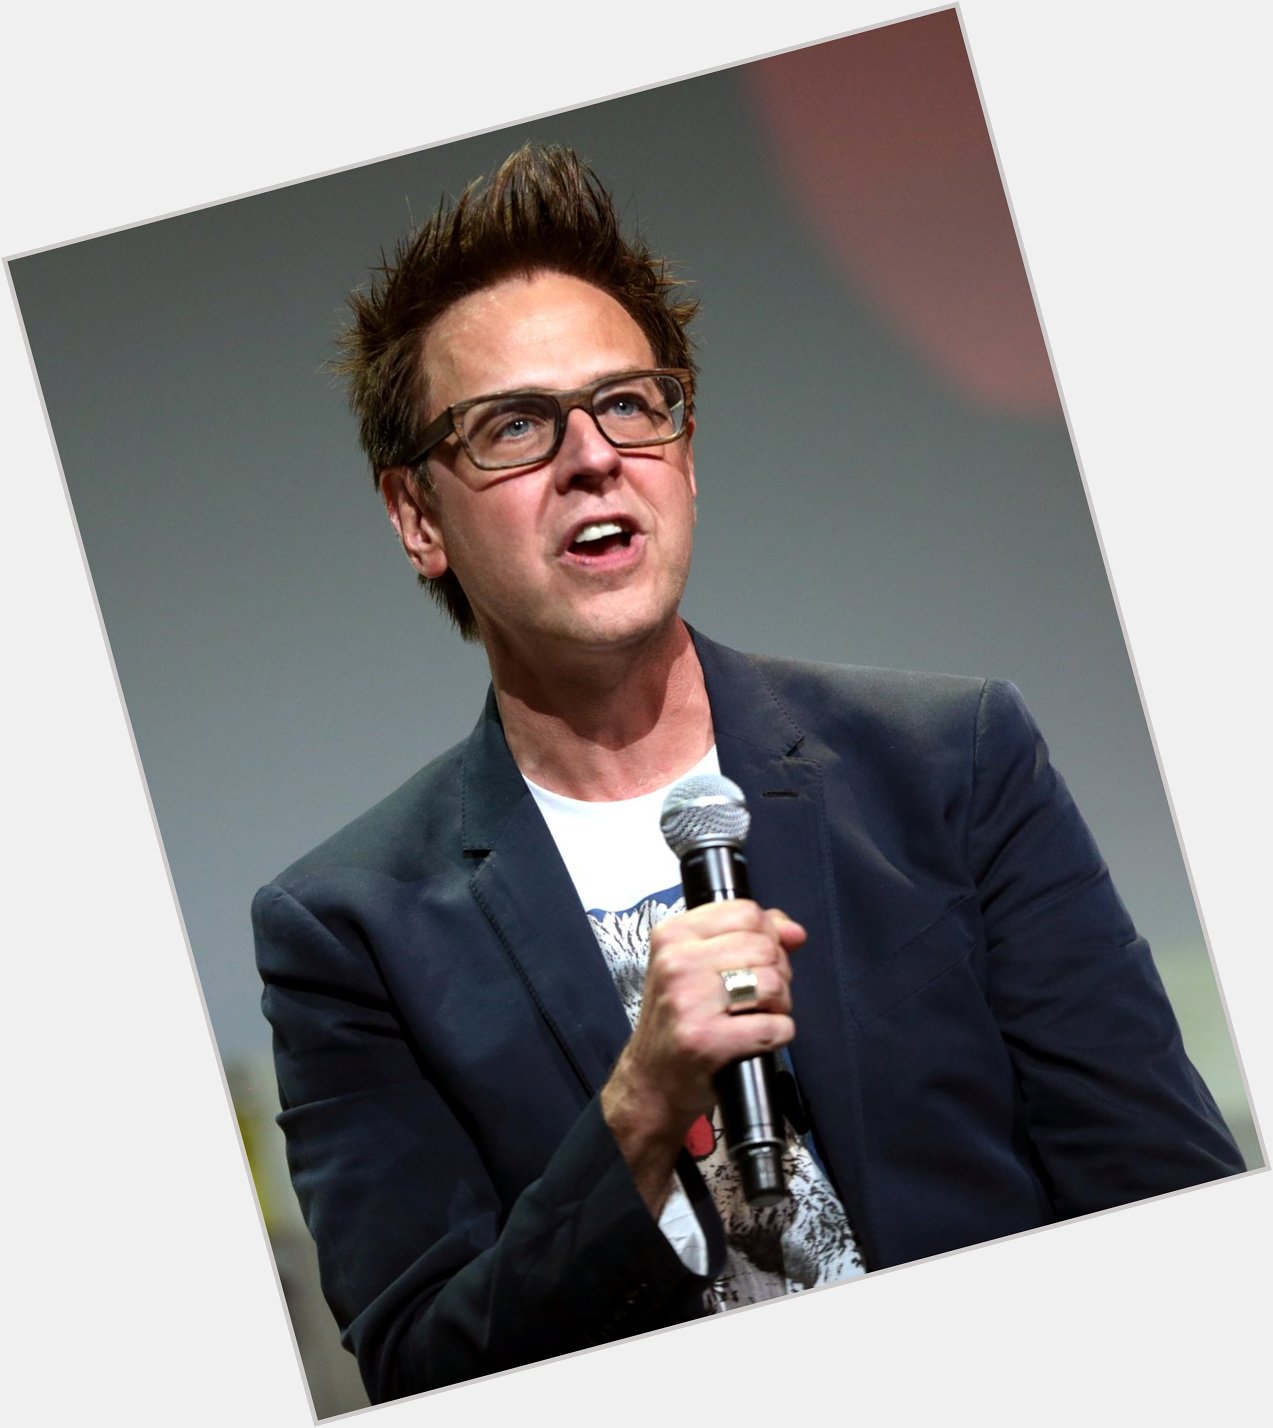 Happy 52nd Birthday to James Gunn! The director of Guardians of the Galaxy Vol. 1 and Vol. 2. 